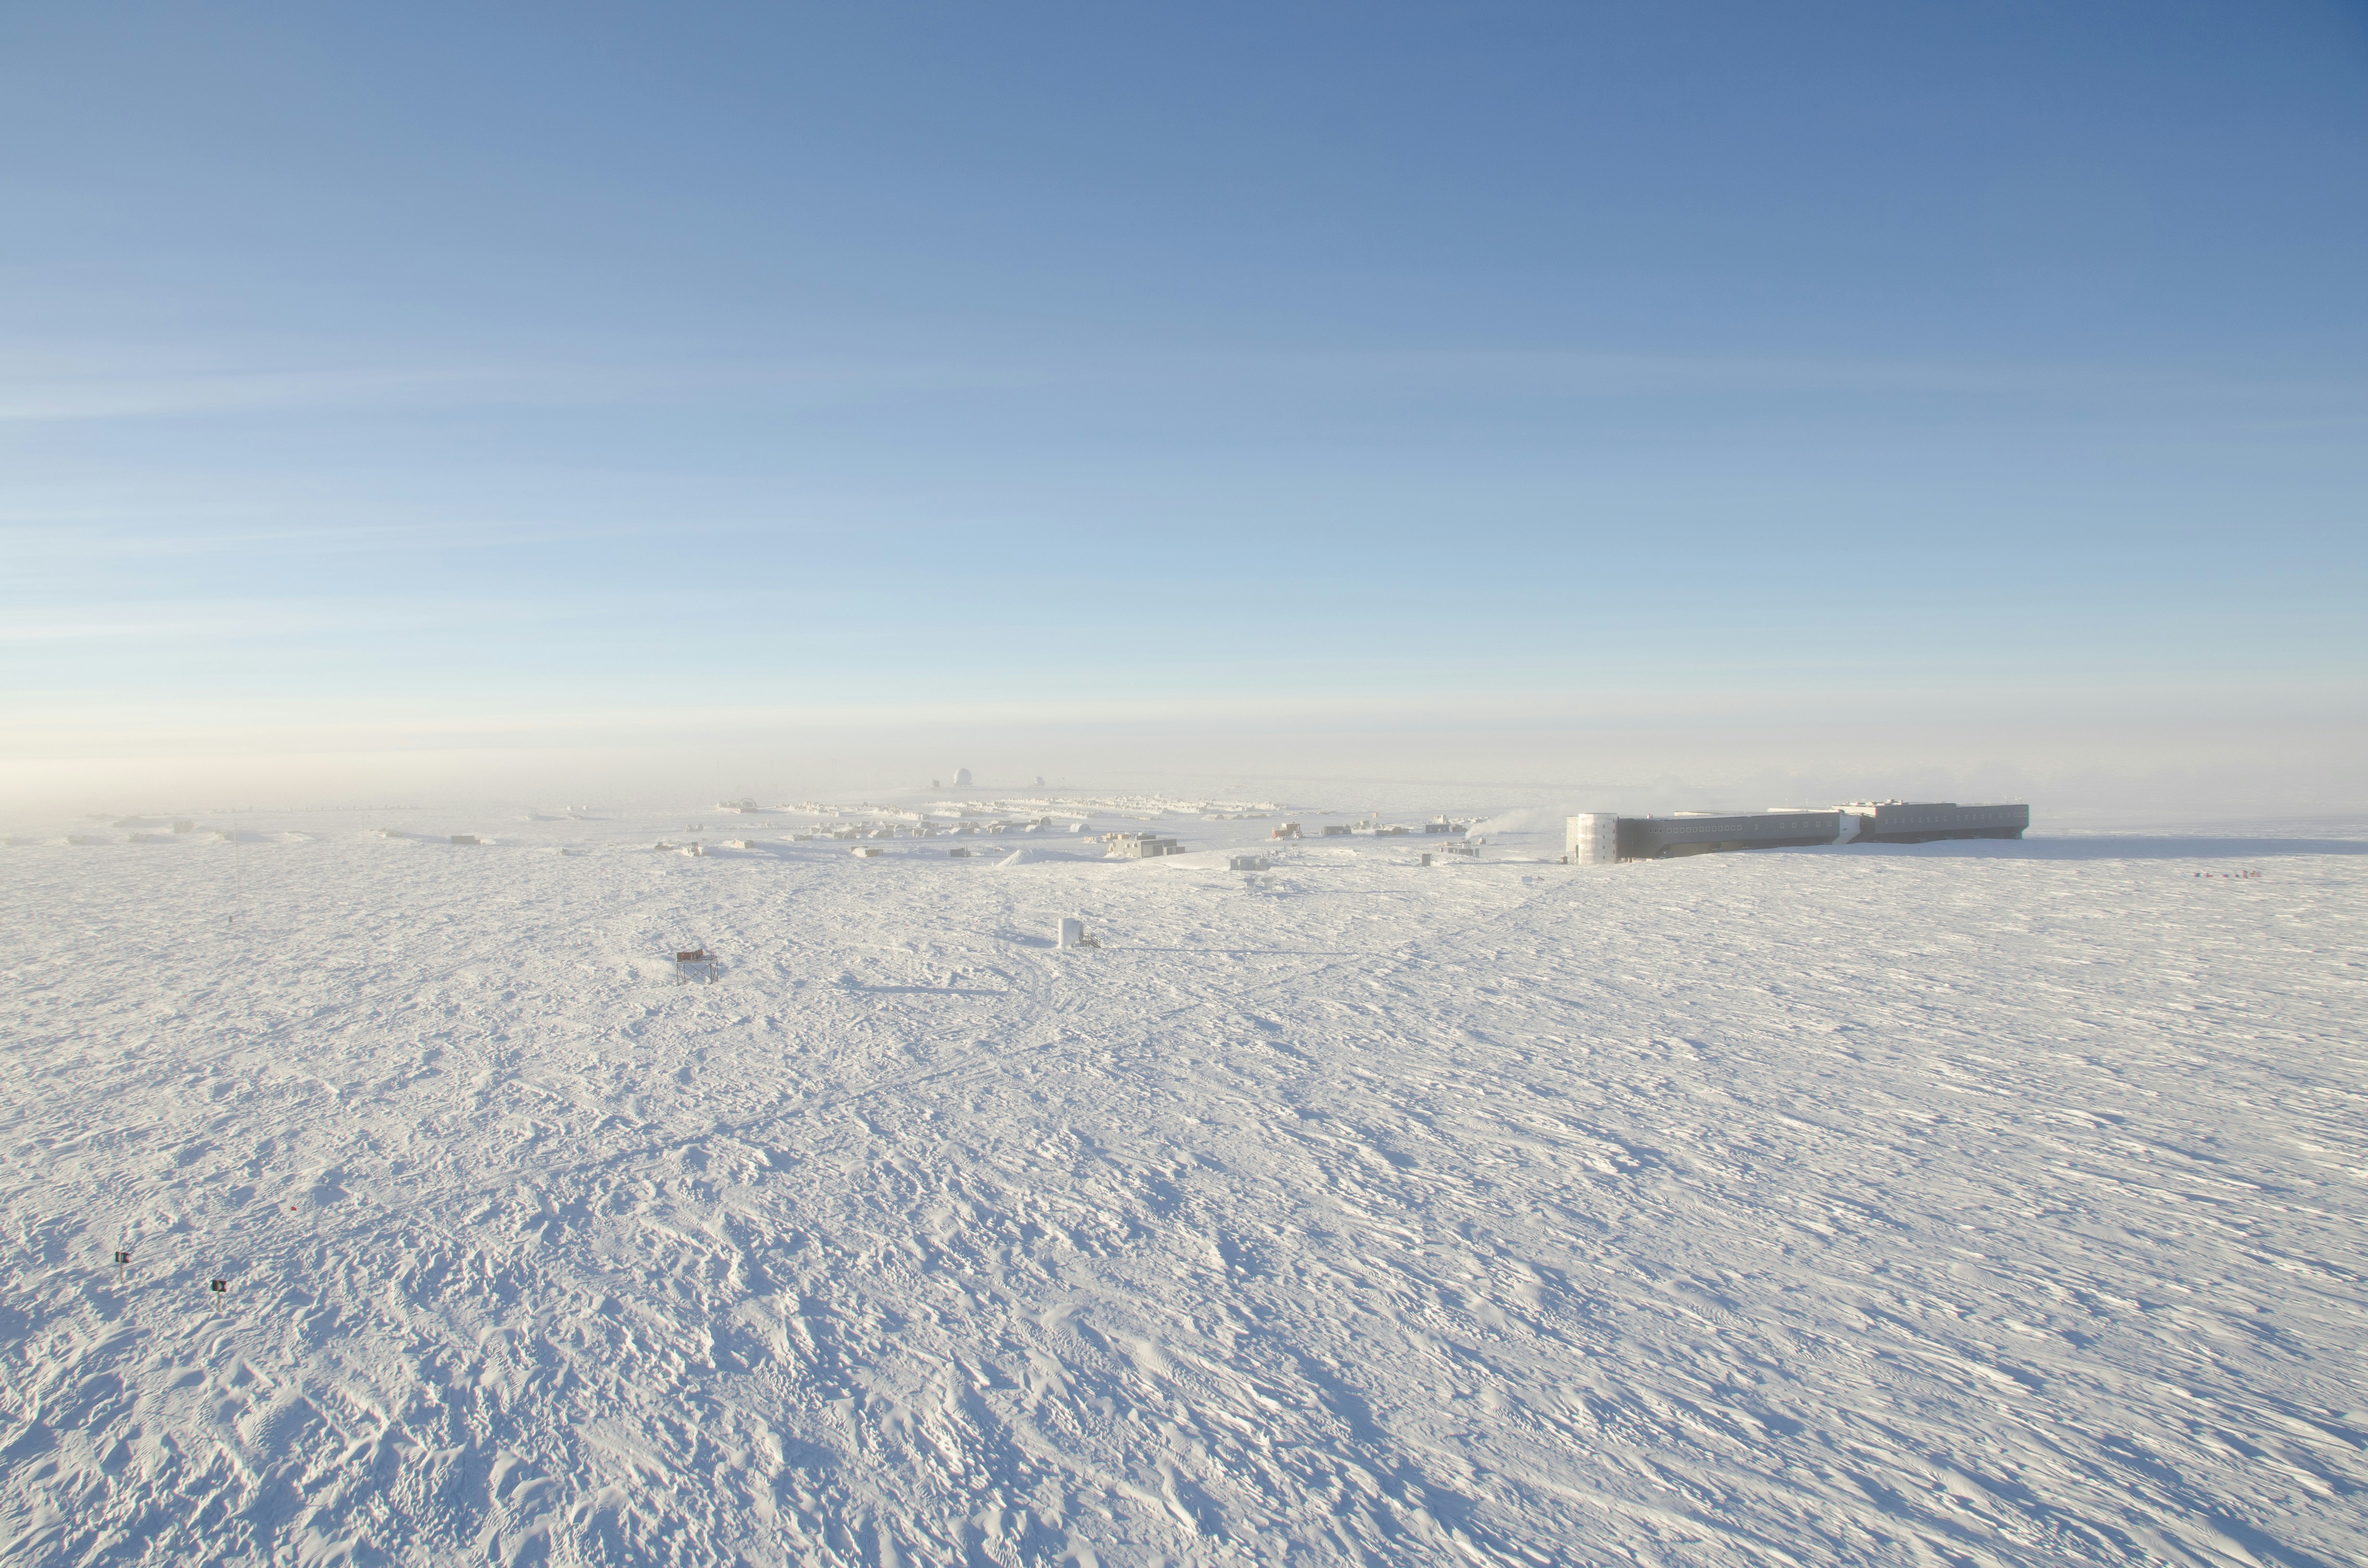 South Pole station seen from the air.